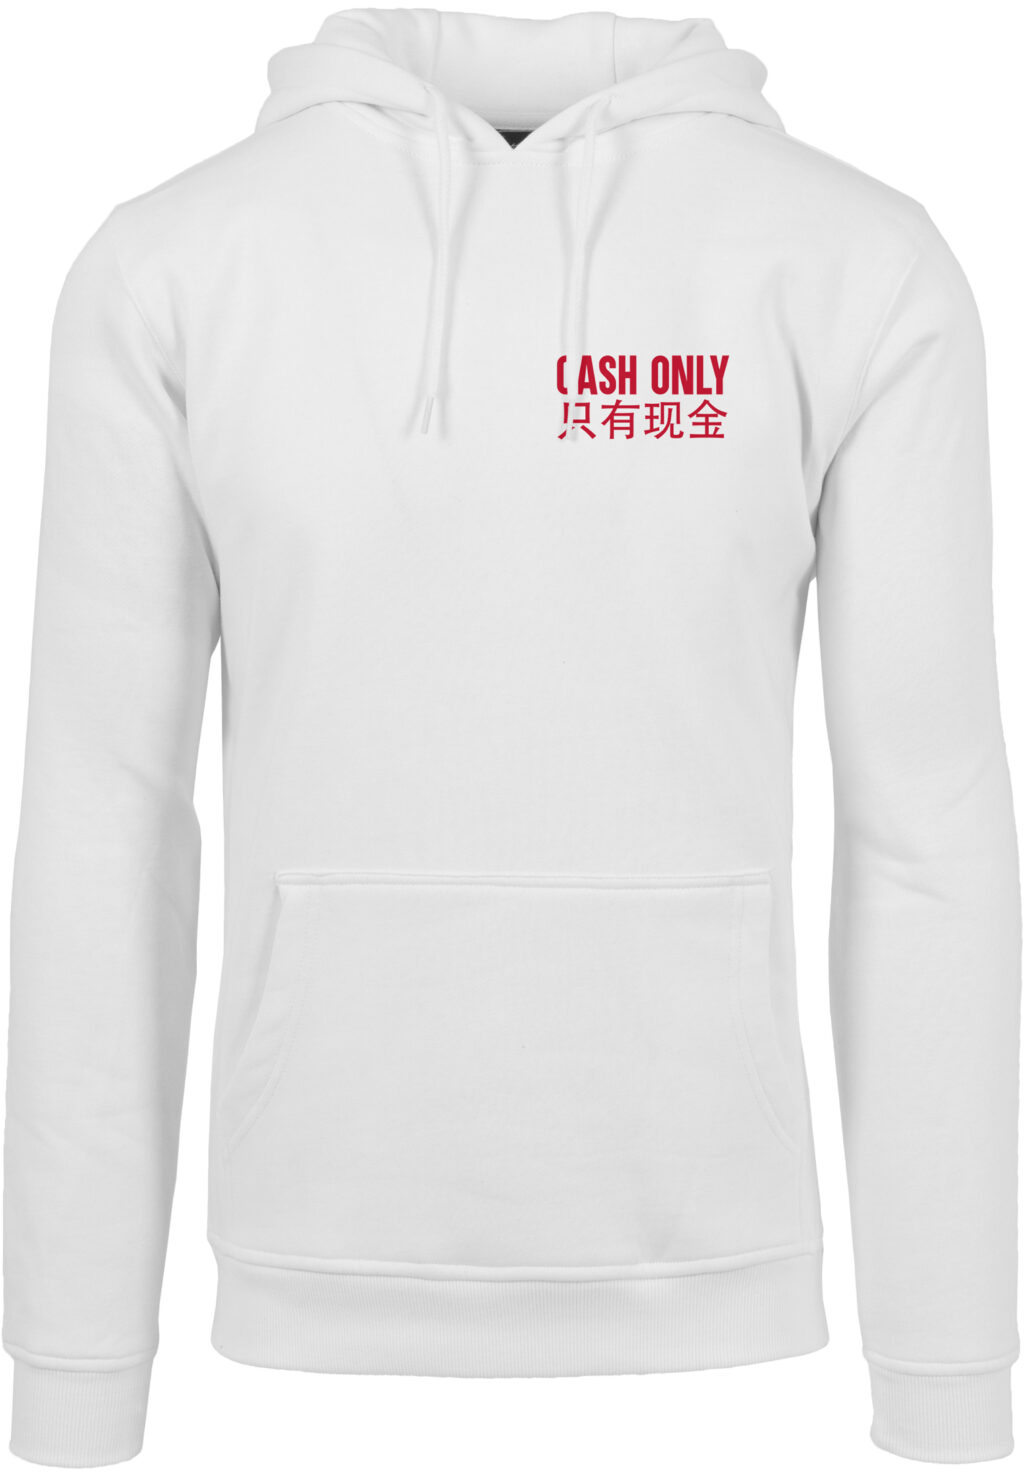 Cash Only Hoody white MT1492